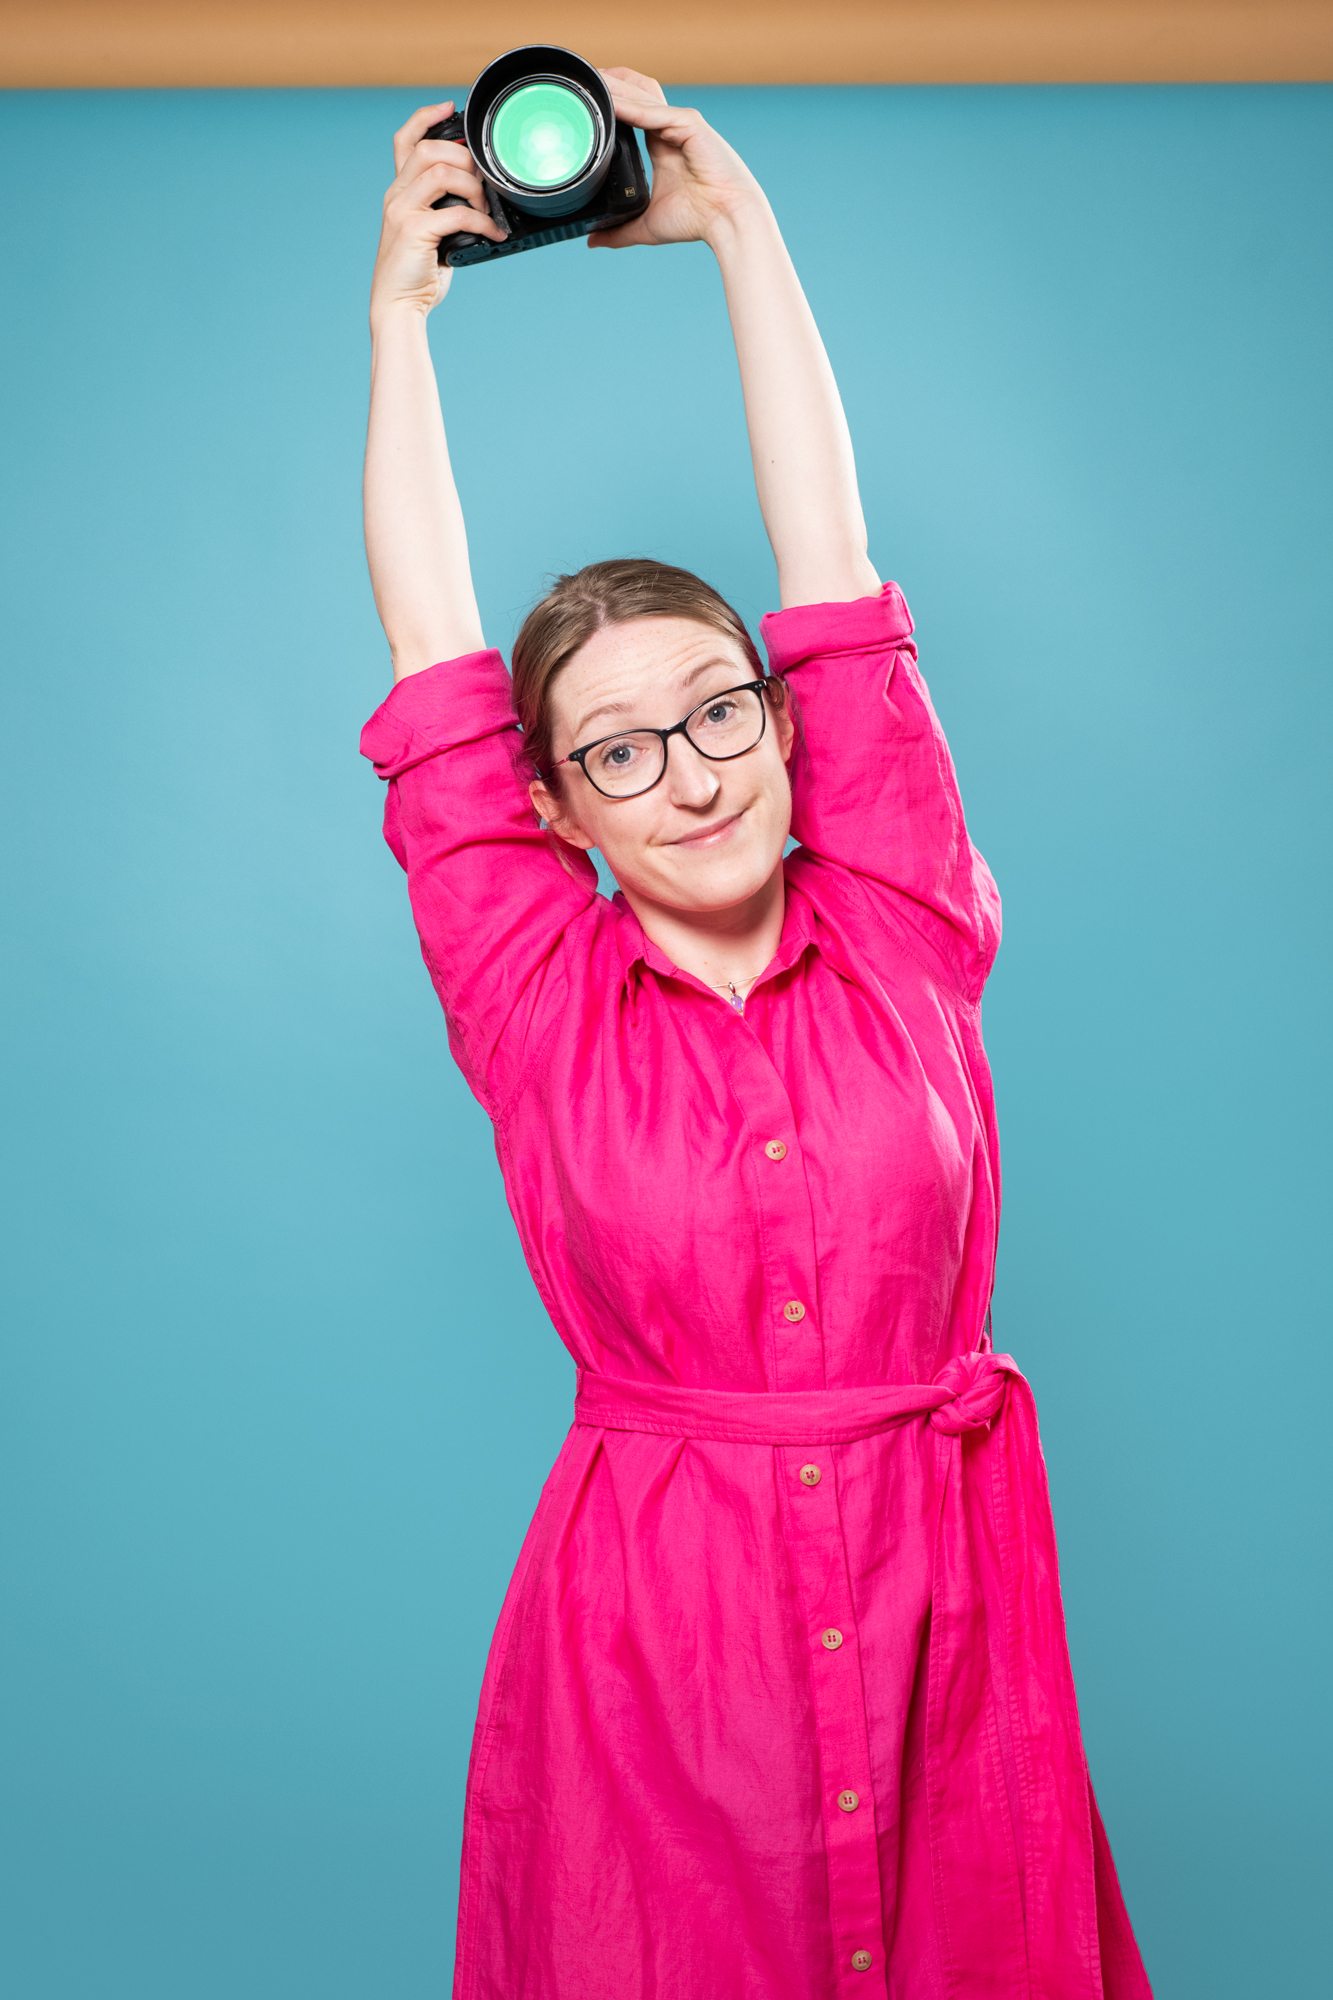 Portrait of Julia Nance in bright pink dress on a blue background holding a camera above her head, with a quirky smile.